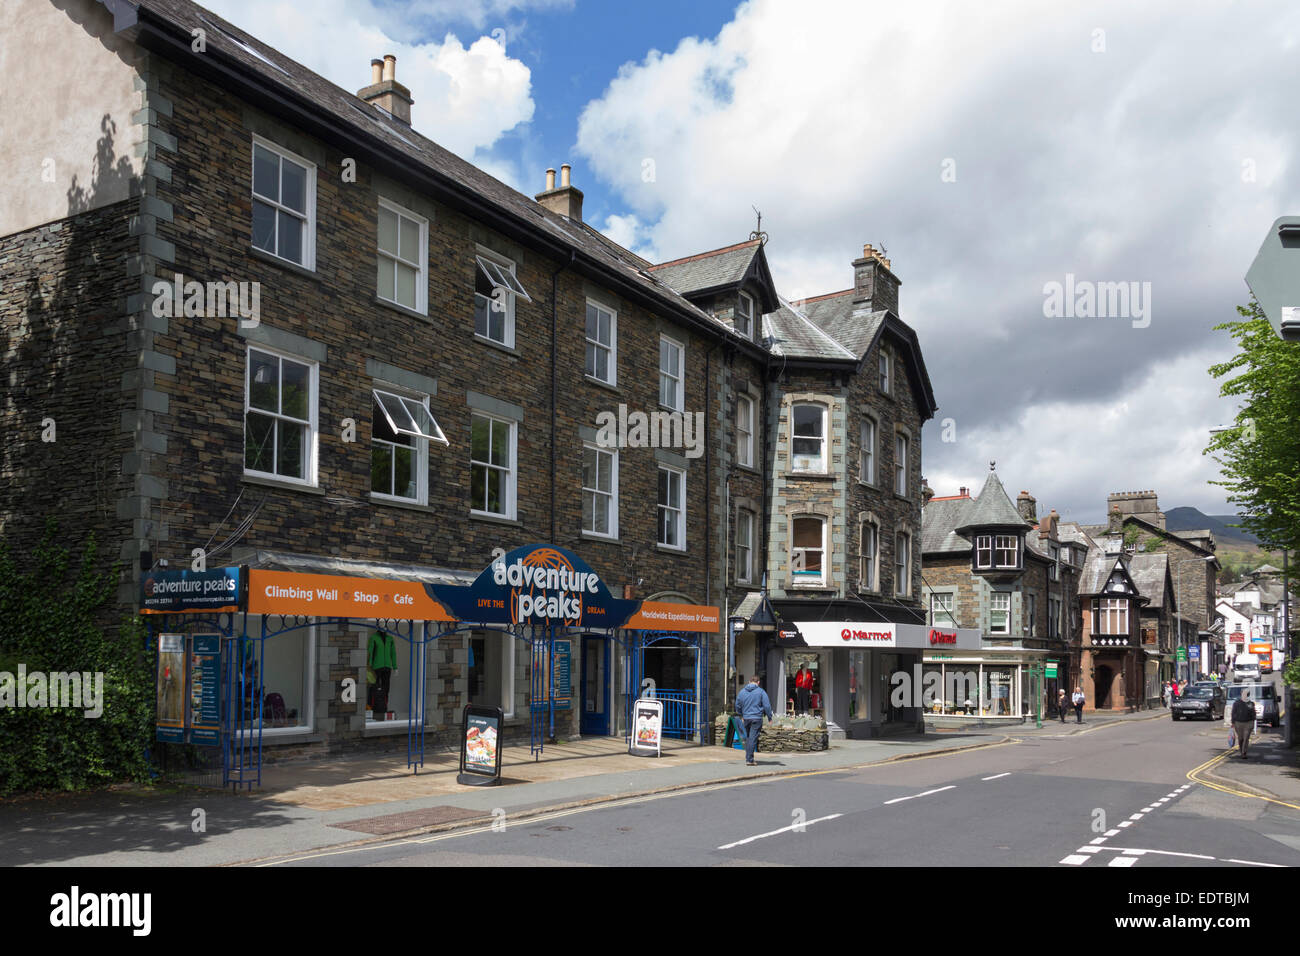 Ambleside in the Lake District Lake Road in the town centre, looking north. Adventure Peaks, the walking and  climbing equipment shop. Stock Photo